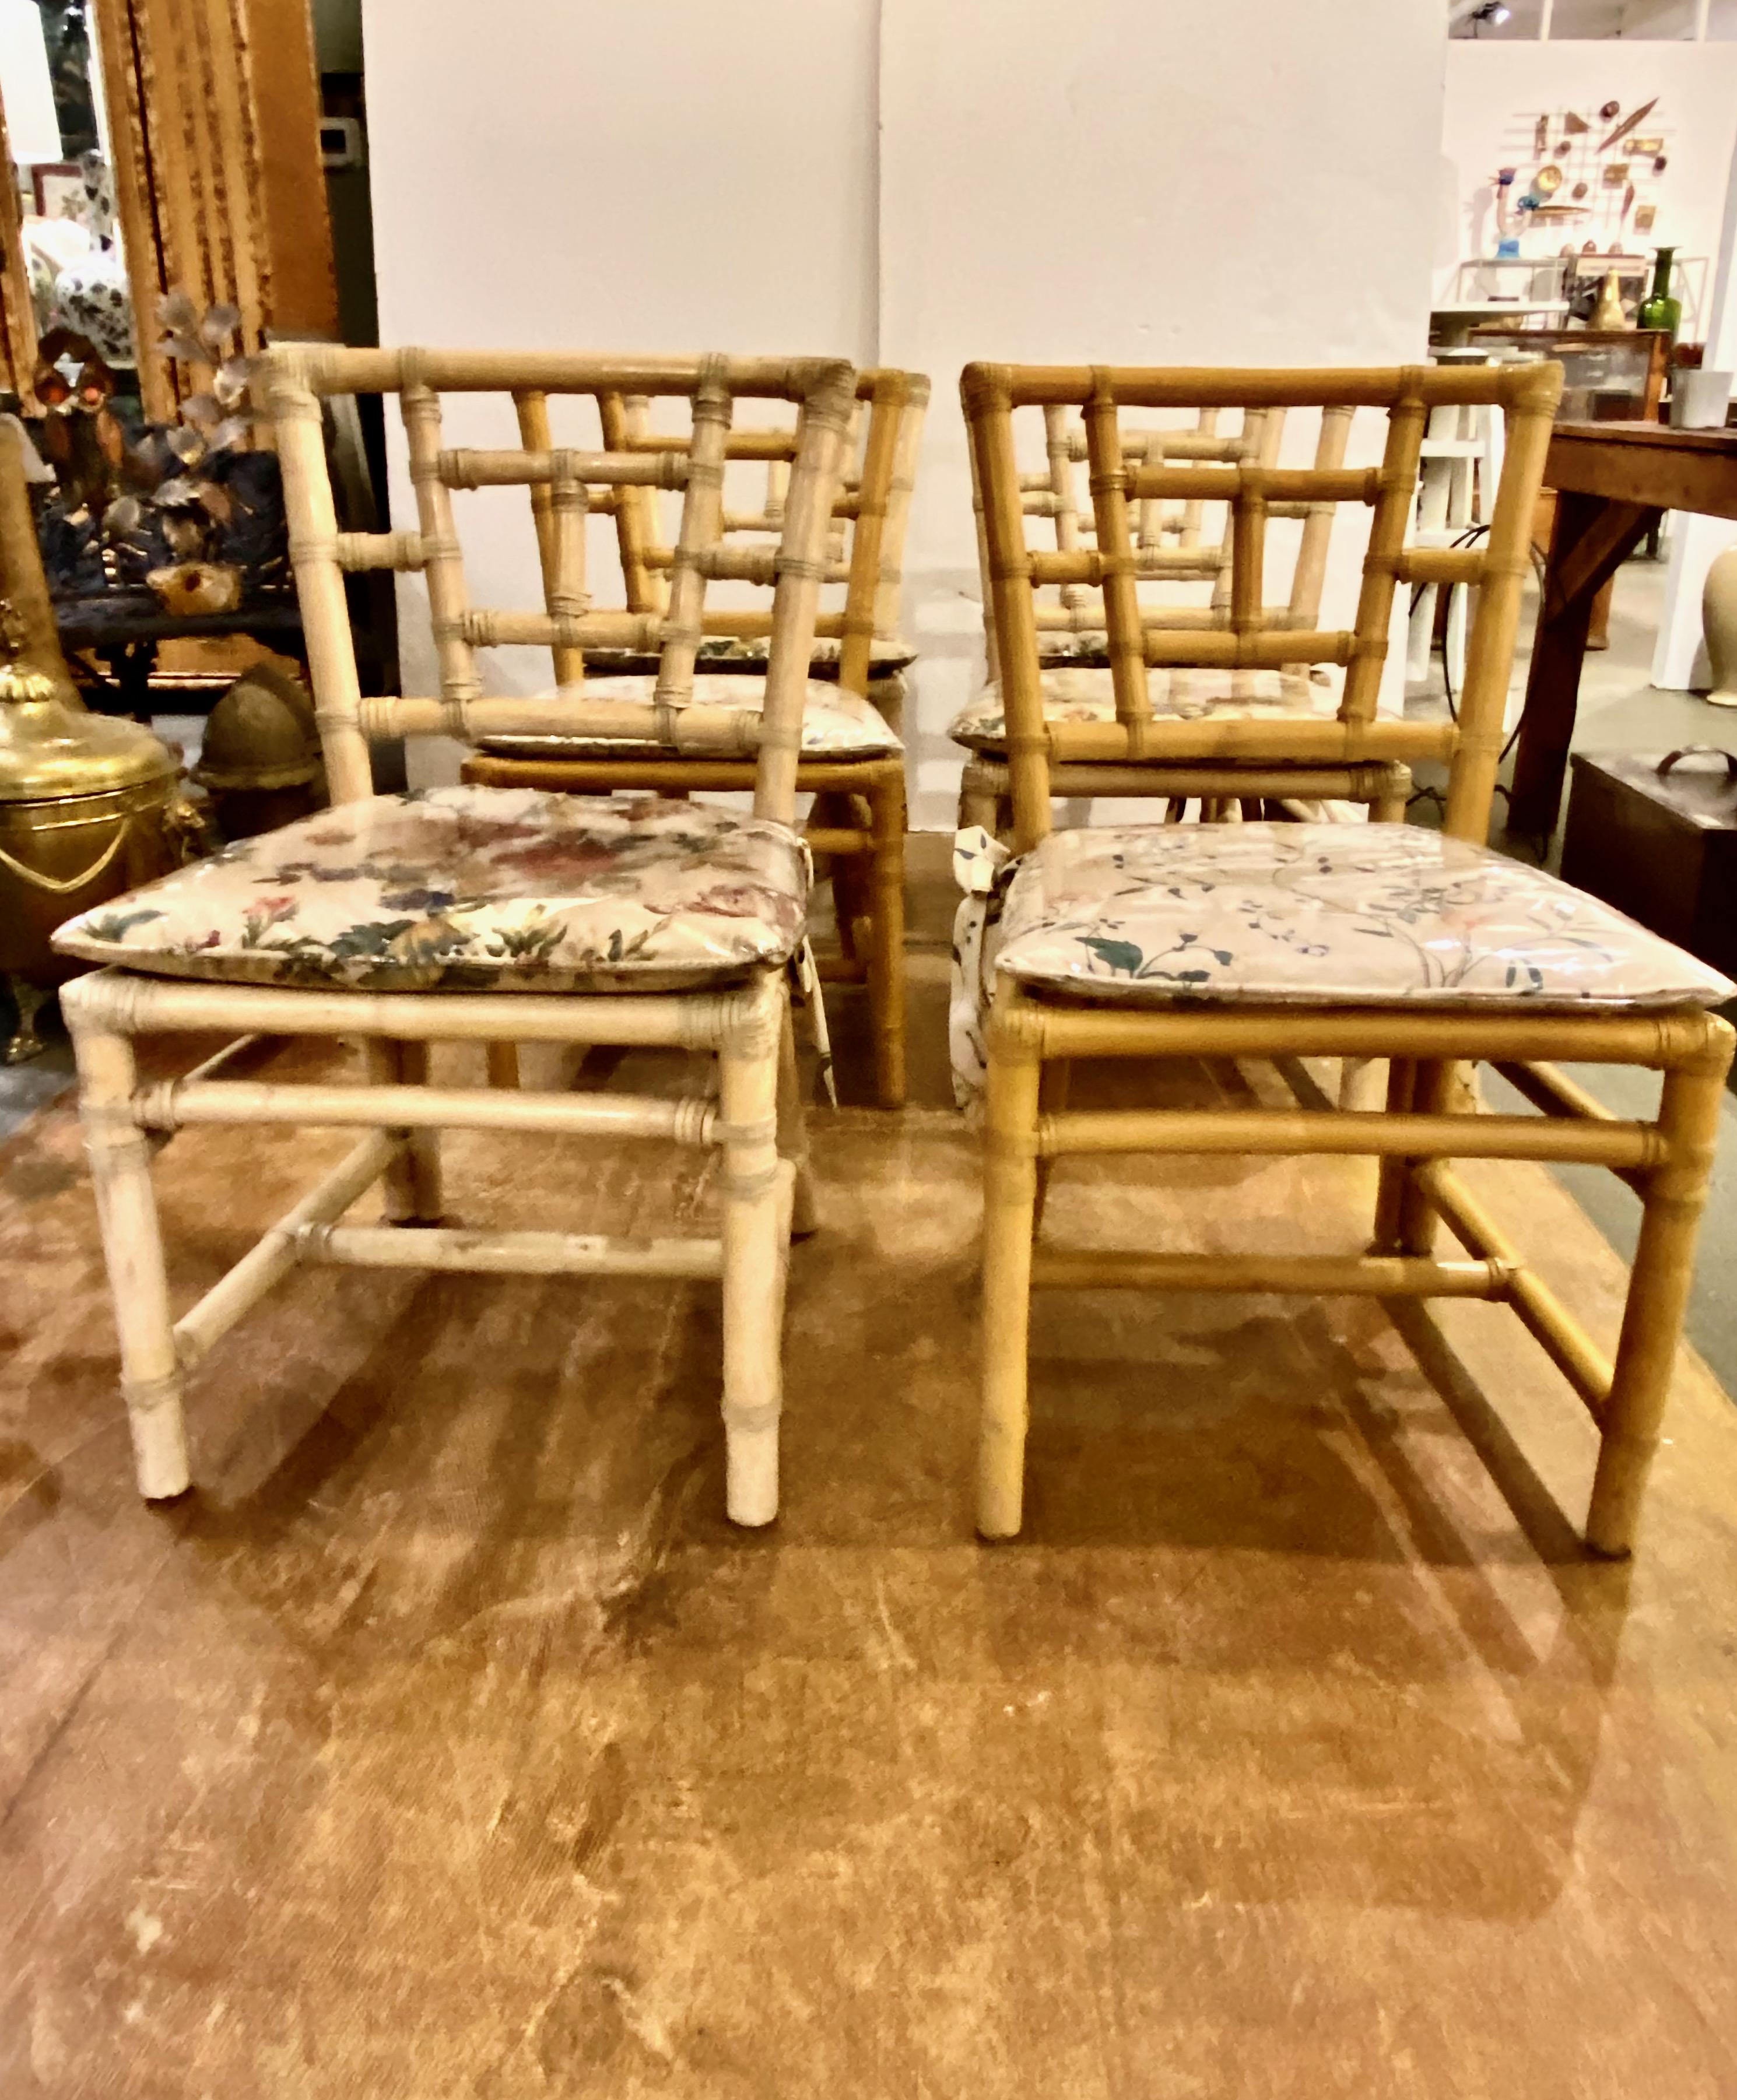 This is a very good set of 8 assembled McGuire dining chairs-- this set is a true representations of Coastal style. Six of the chairs are in a cerused/washed finish and two of the chairs are in a mustard yellow. The chairs retain their original